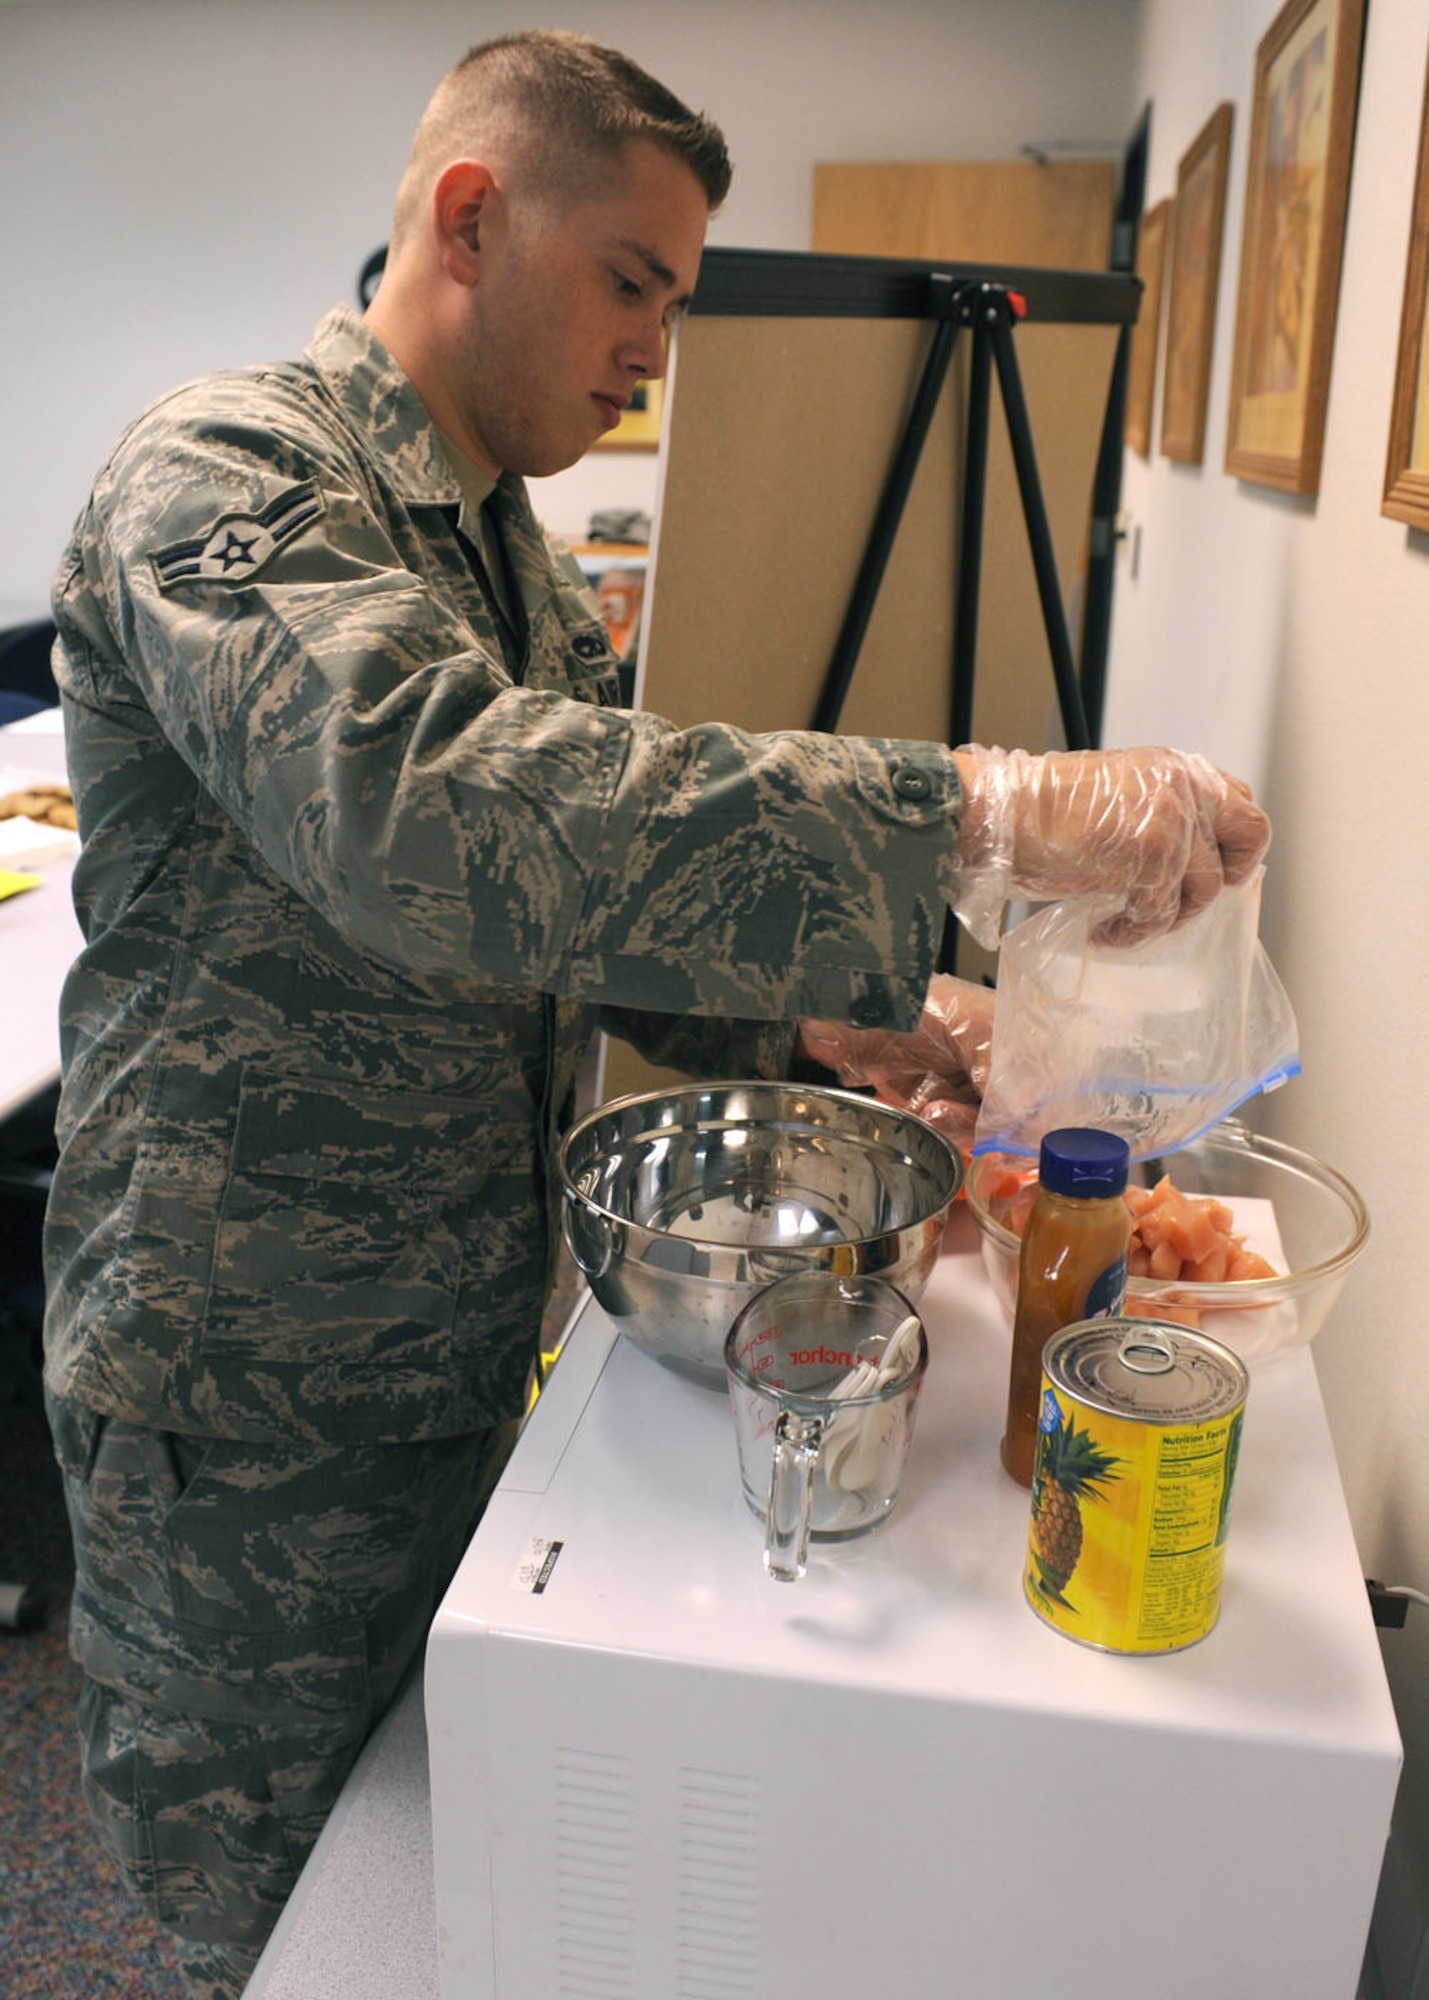 DYESS AIR FORCE BASE, Texas – Airman 1st Class Briggen Baker, 7th Aircraft Maintenance Squadron, prepares food to be cooked March 18 during a microwave cooking class at the Health and Wellness Center here. The class is designed to teach dorm residents the flexibility of microwave cooking so they're not bound to the dining facility. Airmen learned to cook cinnamon rolls, chicken dip and sweet and sour chicken. Dyess Health and Wellness Center is offering nutrition bingo March 24 from 5-6 p.m., kids healthy snack class March 25 from 10-11 a.m. and a snack bar challenge that ends March 25 as part of National Nutrition Month. For more information, visit the HAWC at the fitness center or call (325) 696-4140. (U.S Air Force Photo/ Senior Airman Chelsea Cummings)